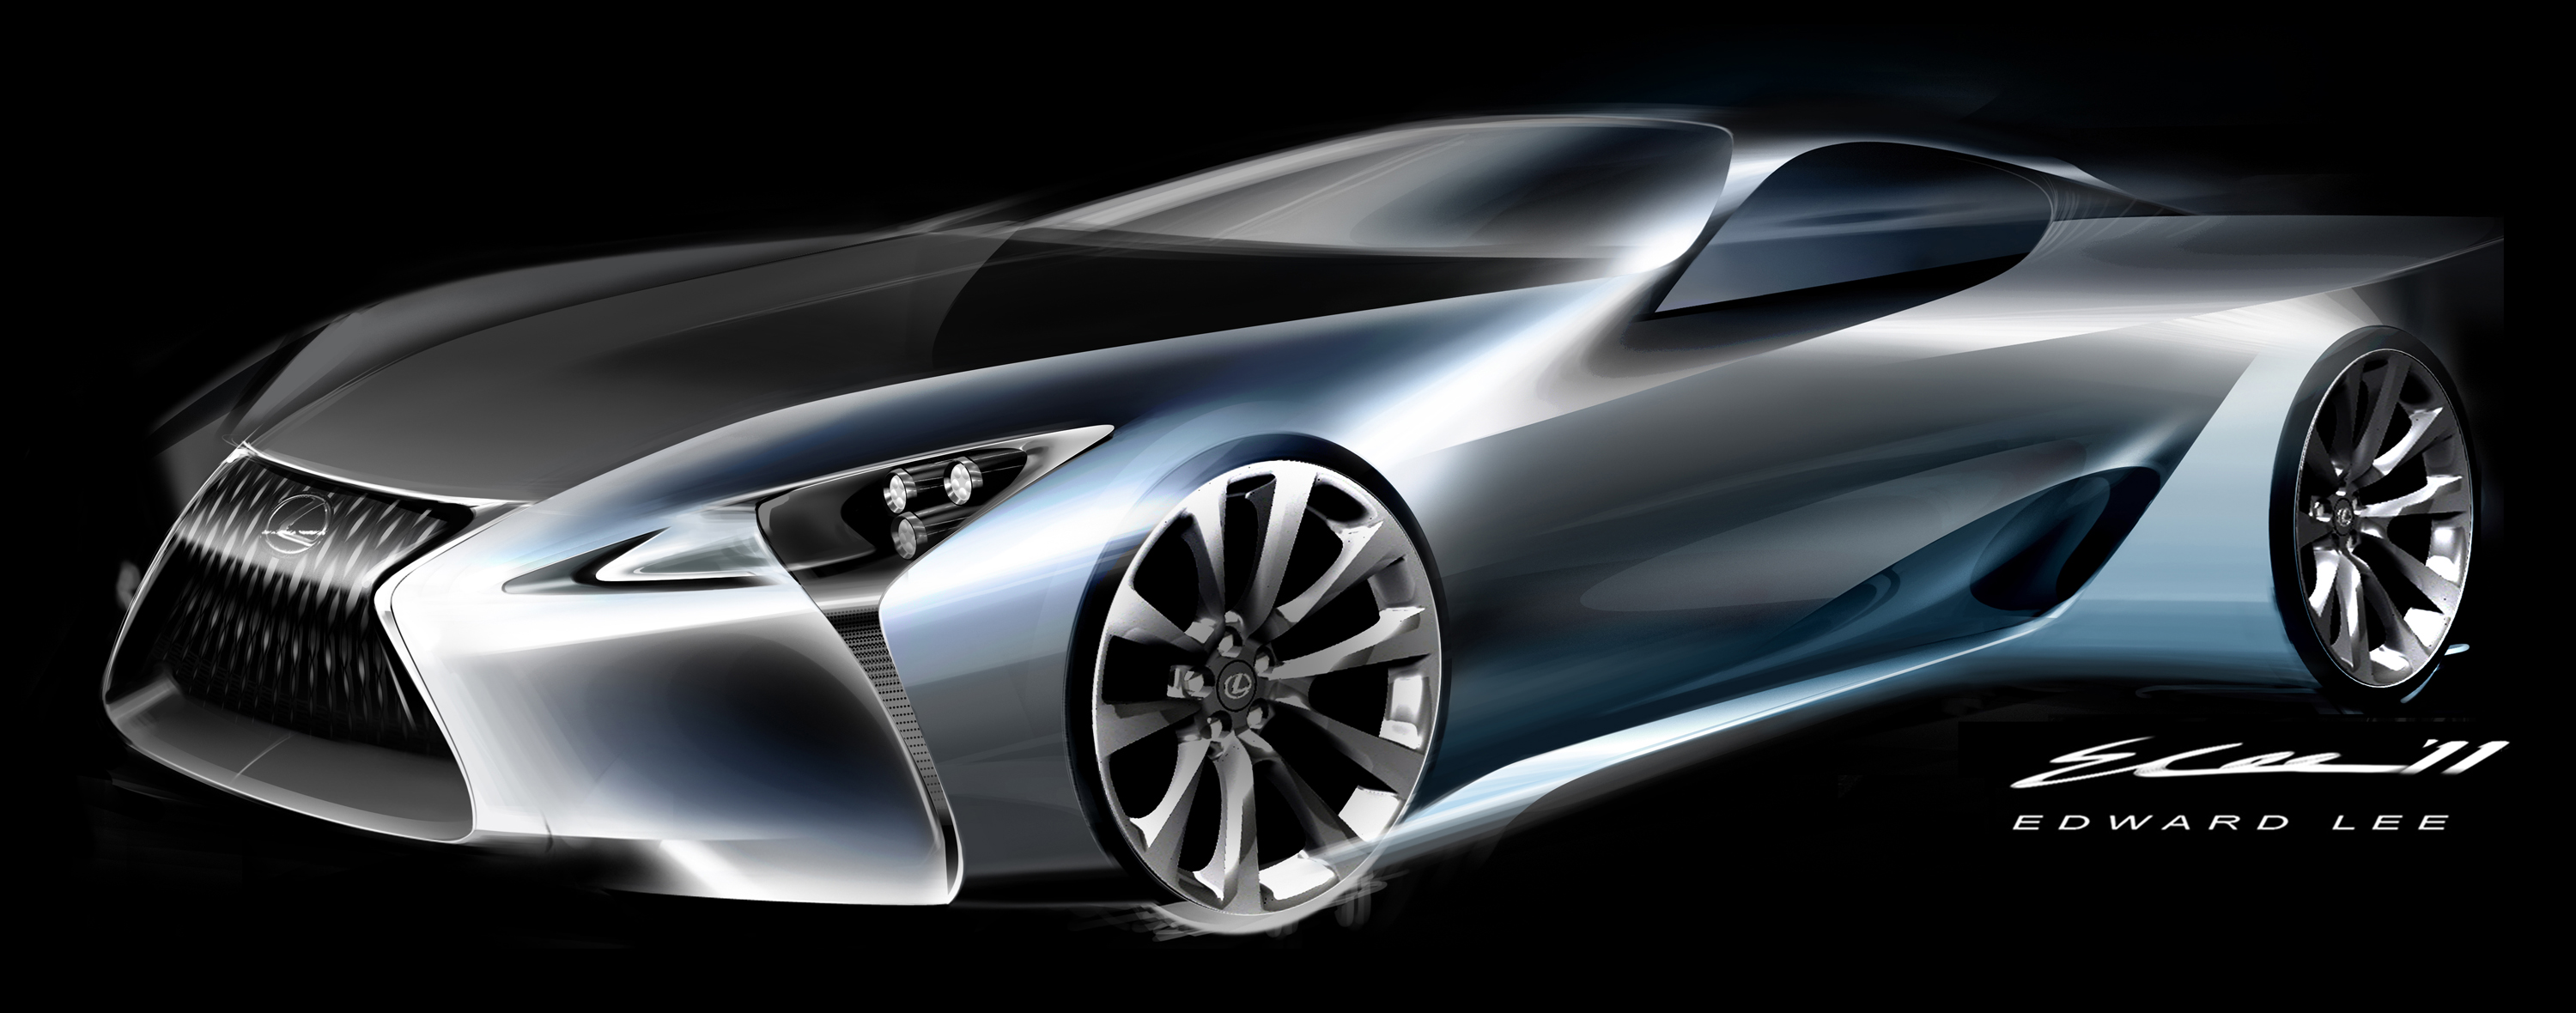 Lexus LF-LC concept (unveiled at the North American International Auto Show in 2012)